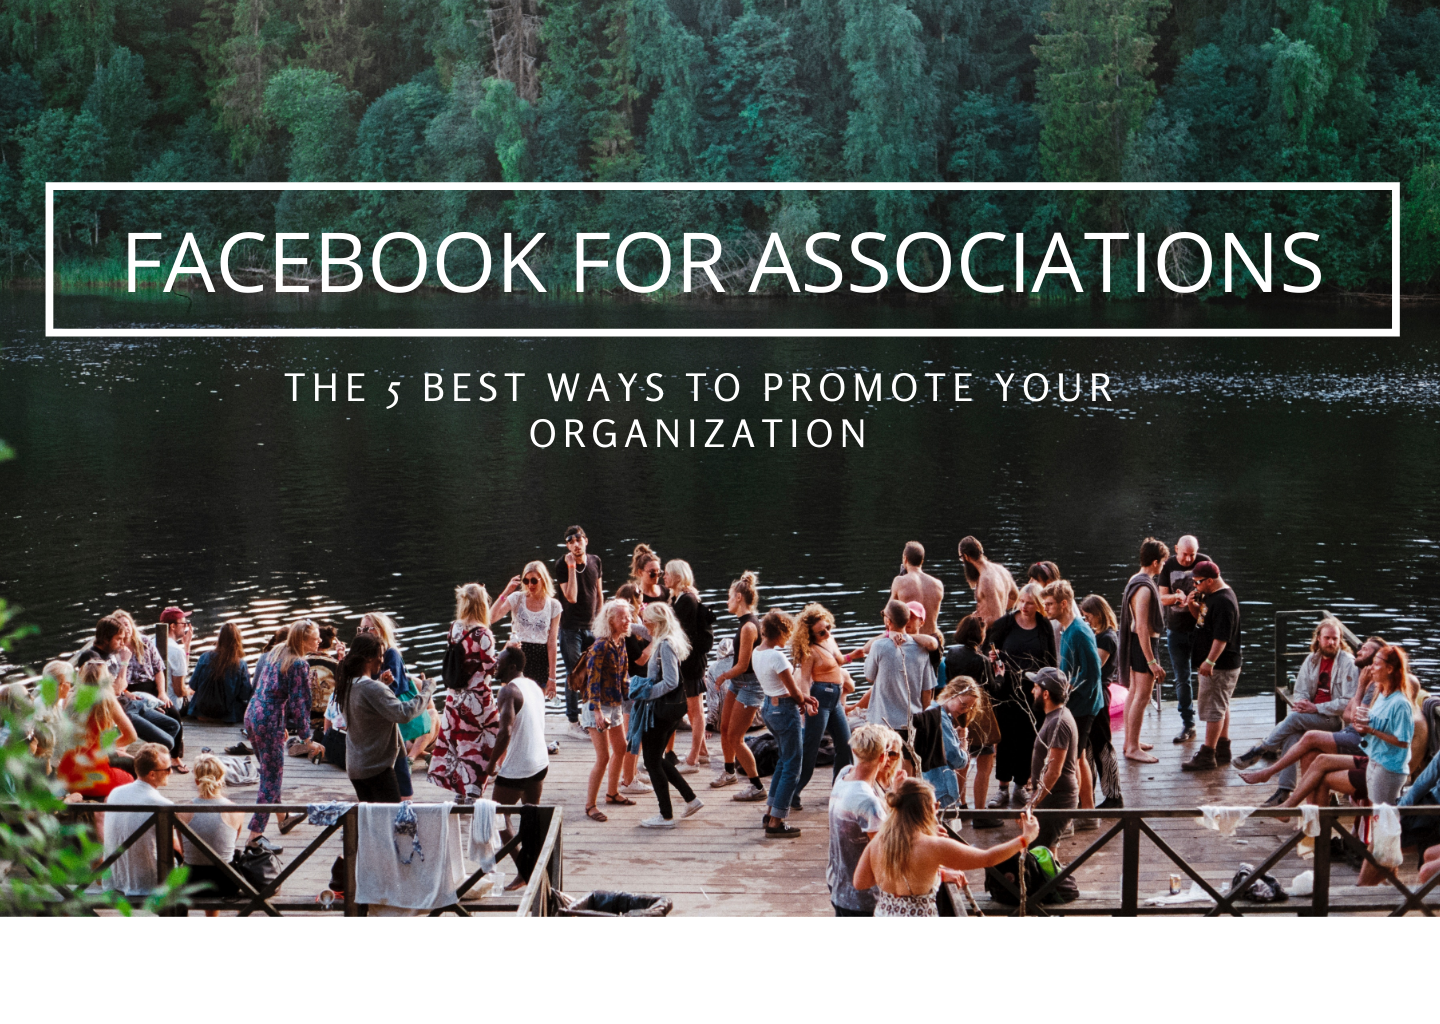 Facebook for Associations: The 5 Best Ways to Promote Your Organization